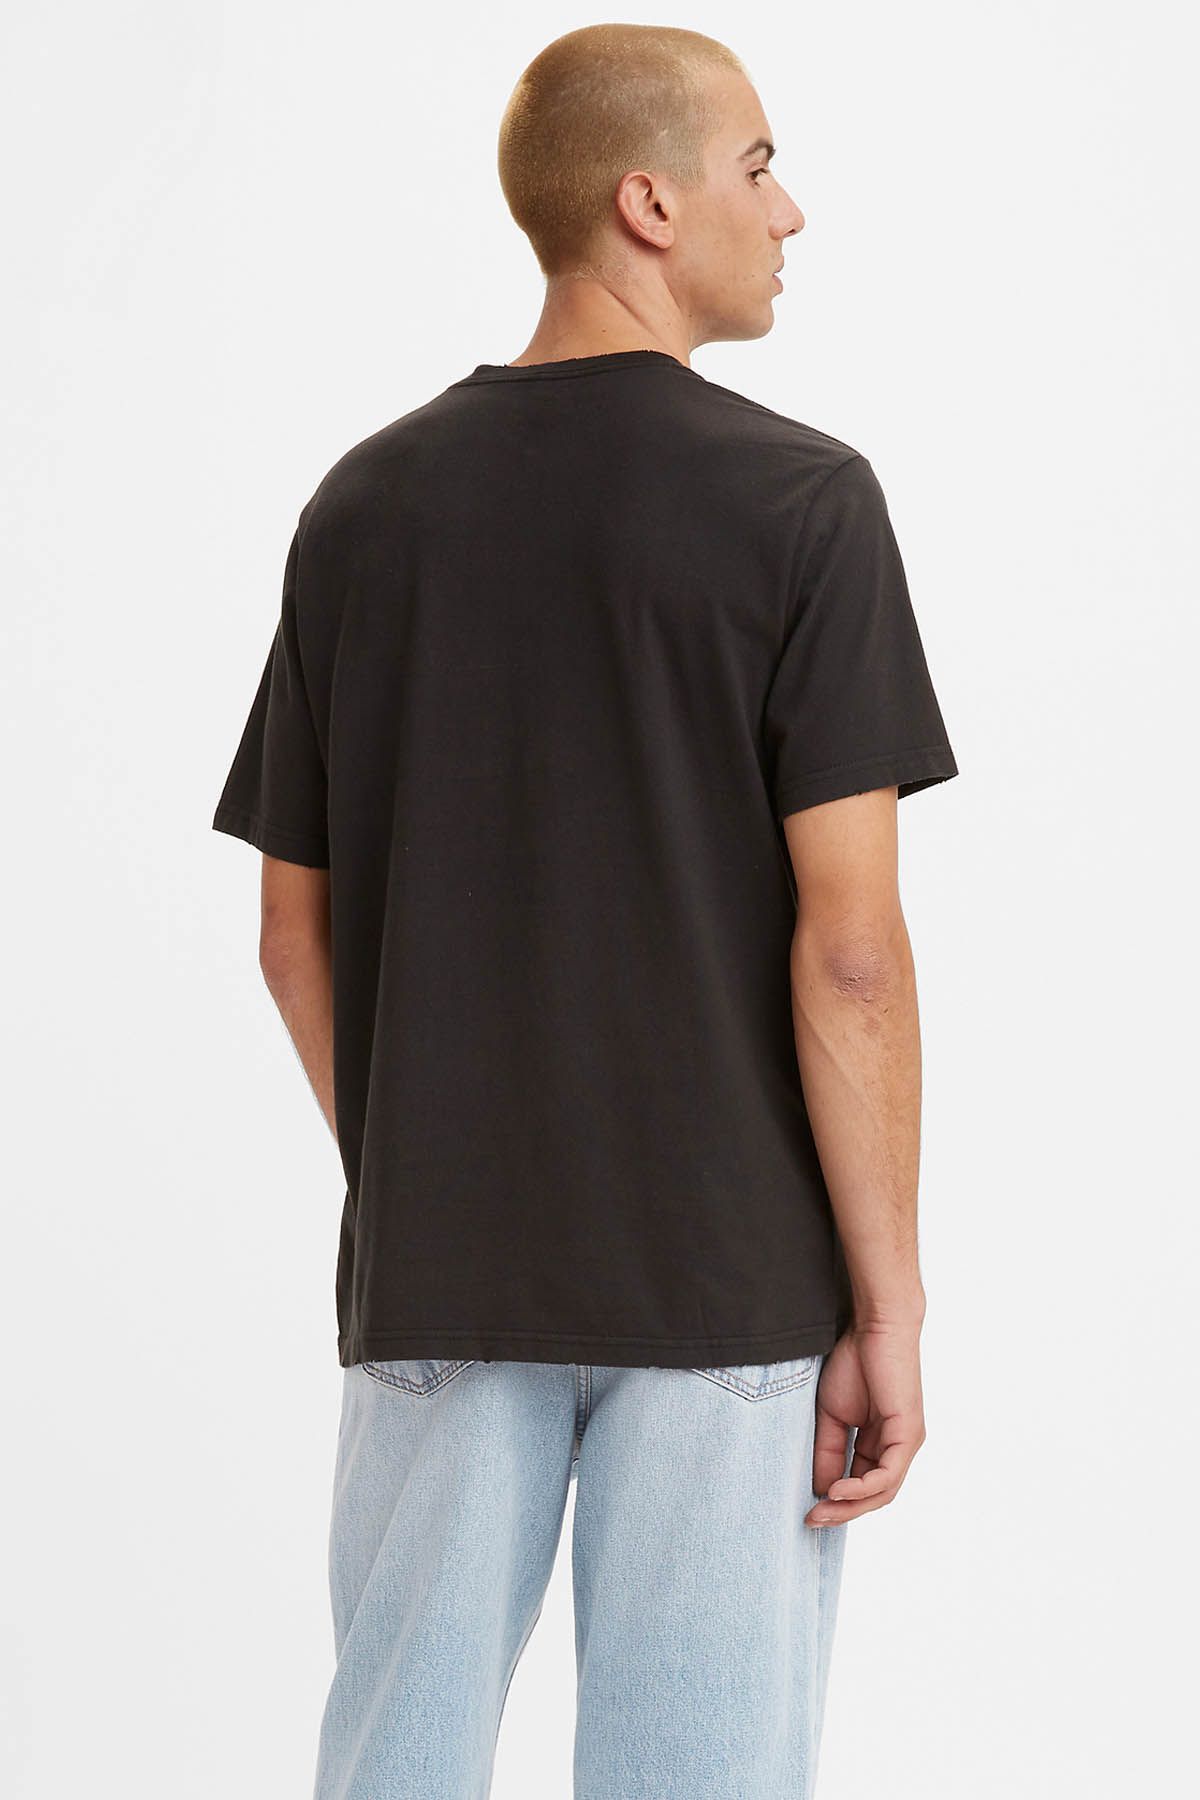 Levi's ® Relaxed Fit Tee Neon Caviar Graphic Black Men T-Shirts